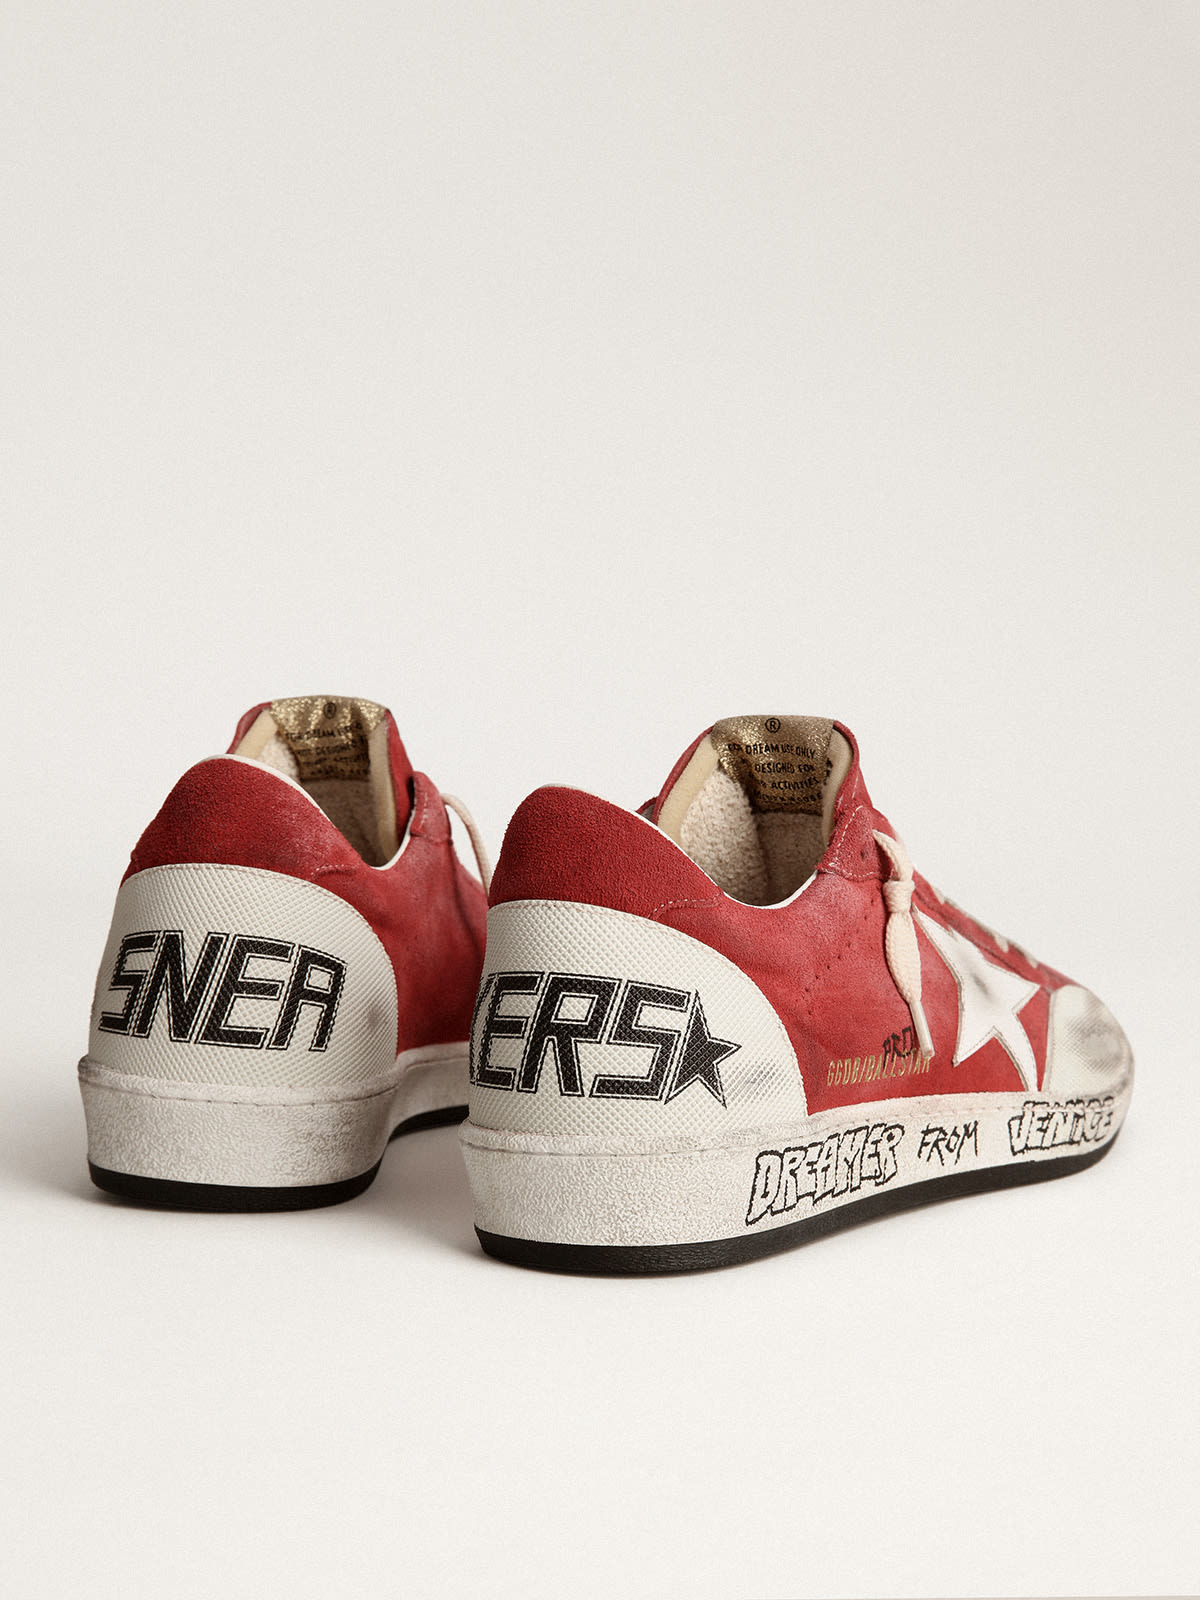 Golden Goose - Ball Star Pro women’s sneakers in red suede with knurled white rubber inserts in 